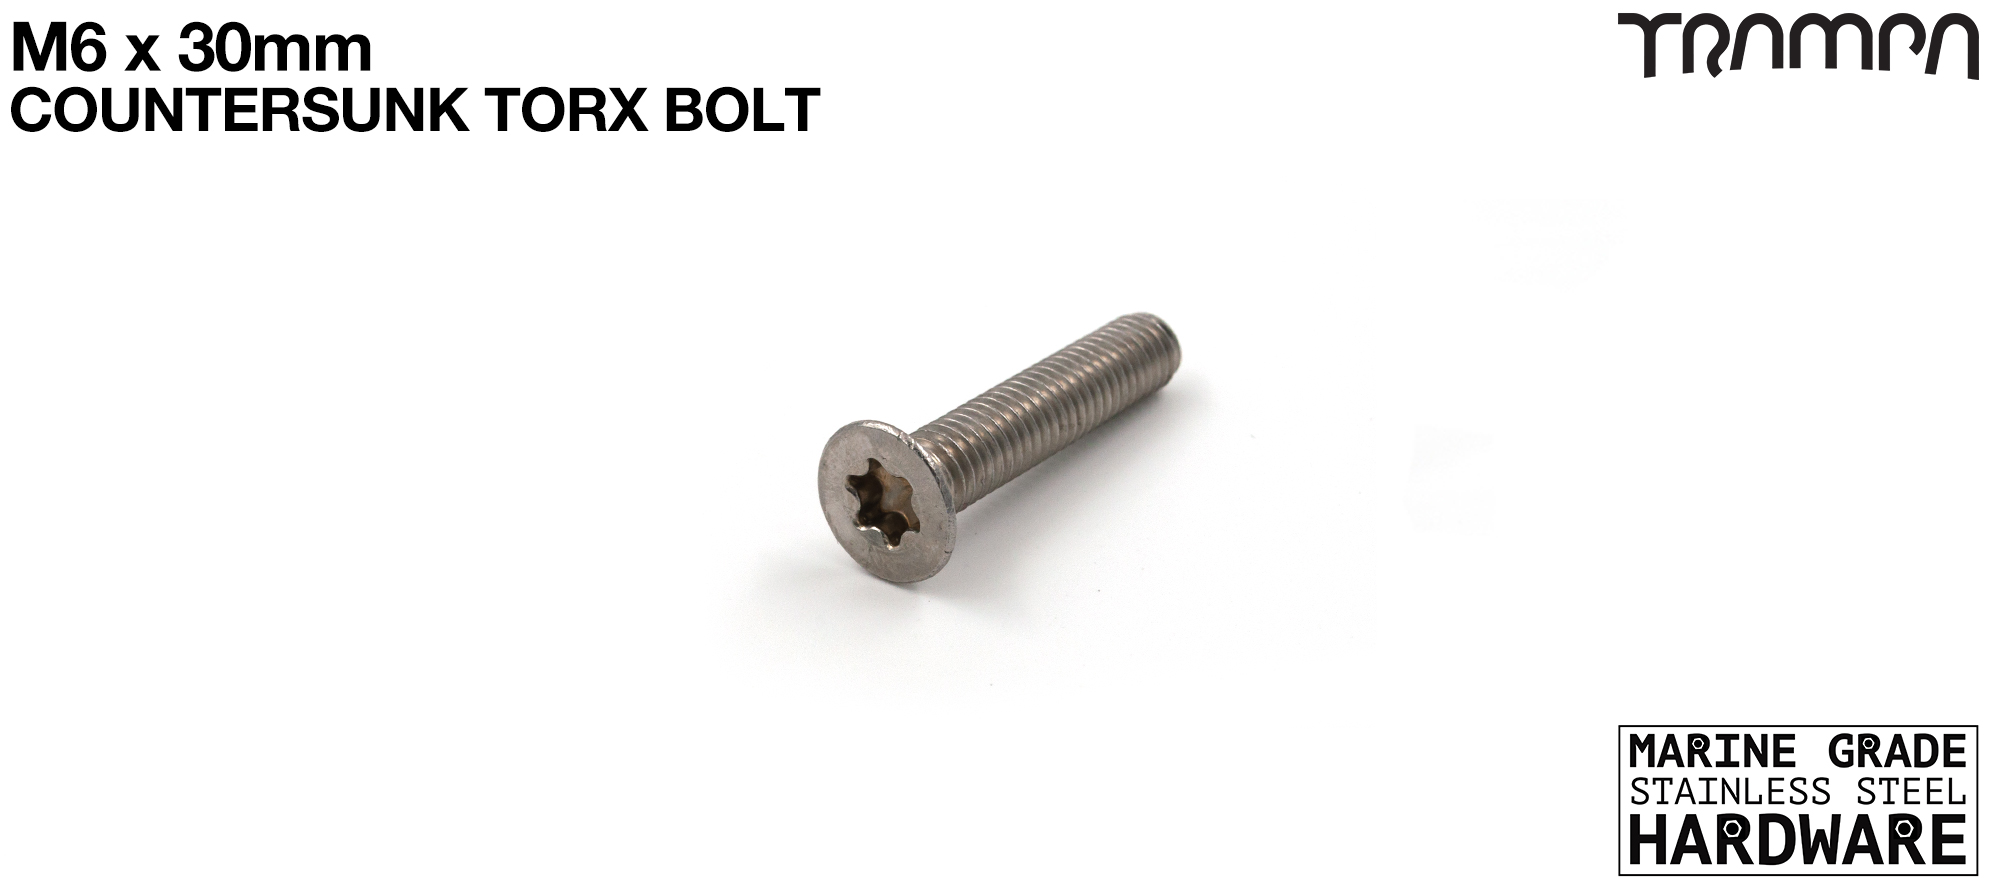 M6 x 30mm TORX Countersunk Bolt Stainless Steel 